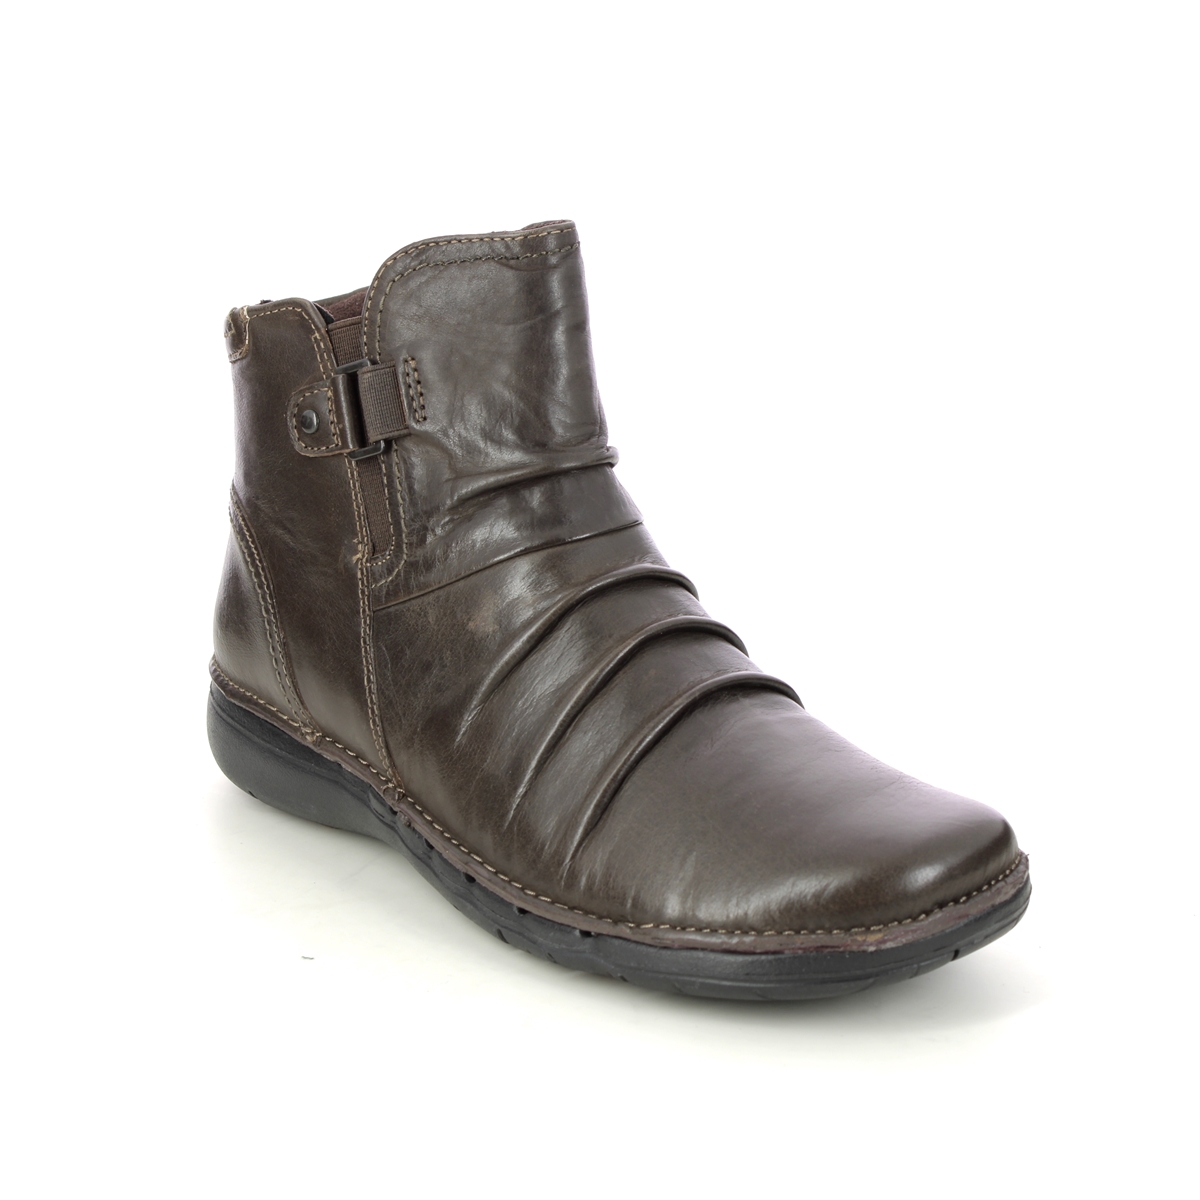 Clarks Un Loop Top Brown Leather Womens Ankle Boots 686624D In Size 4 In Plain Brown Leather